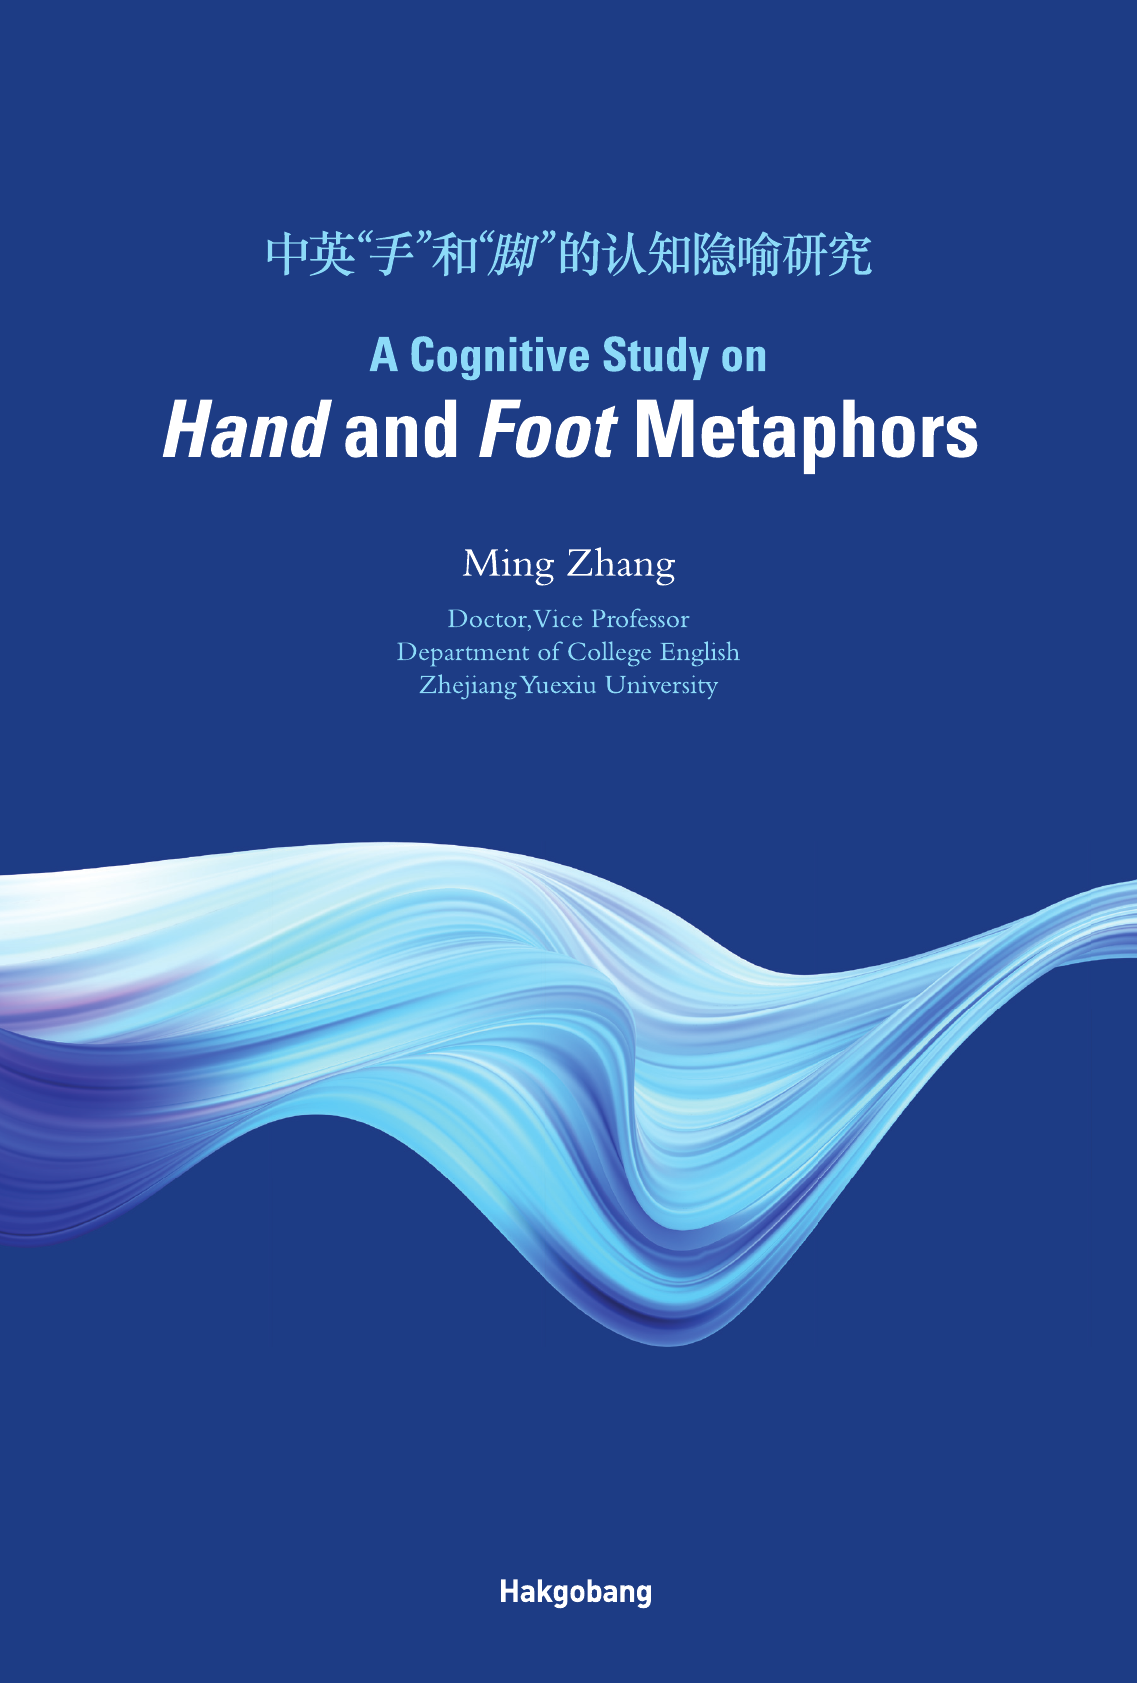 (A) cognitive study on hand and foot metaphor